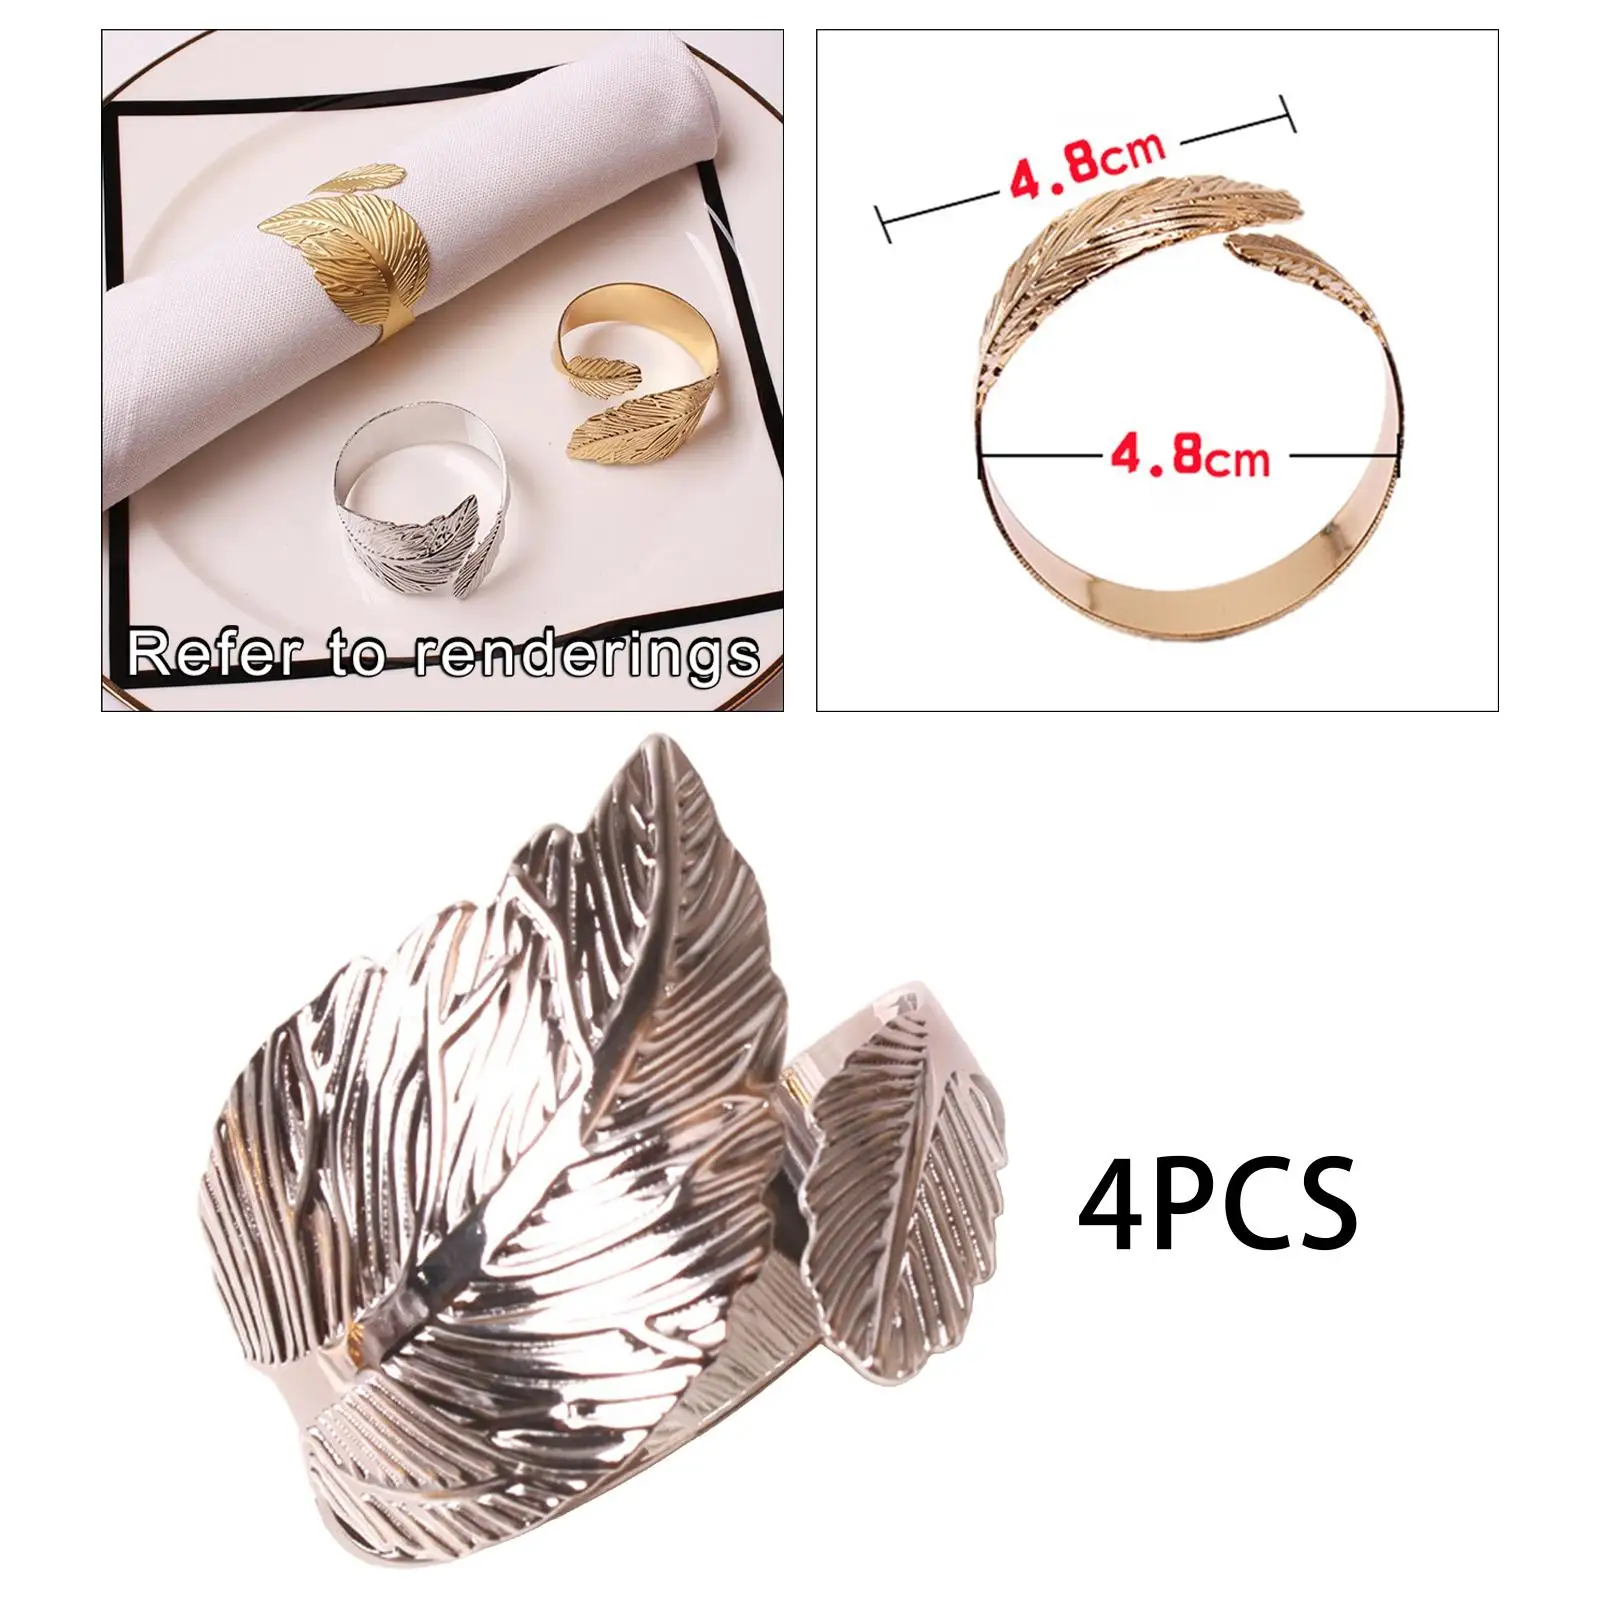 4Pcs Leaf Napkin Buckles Crafts Holder Wedding Event Decor Party Supplies Handmade Feather Napkin Rings for Parties Halloween